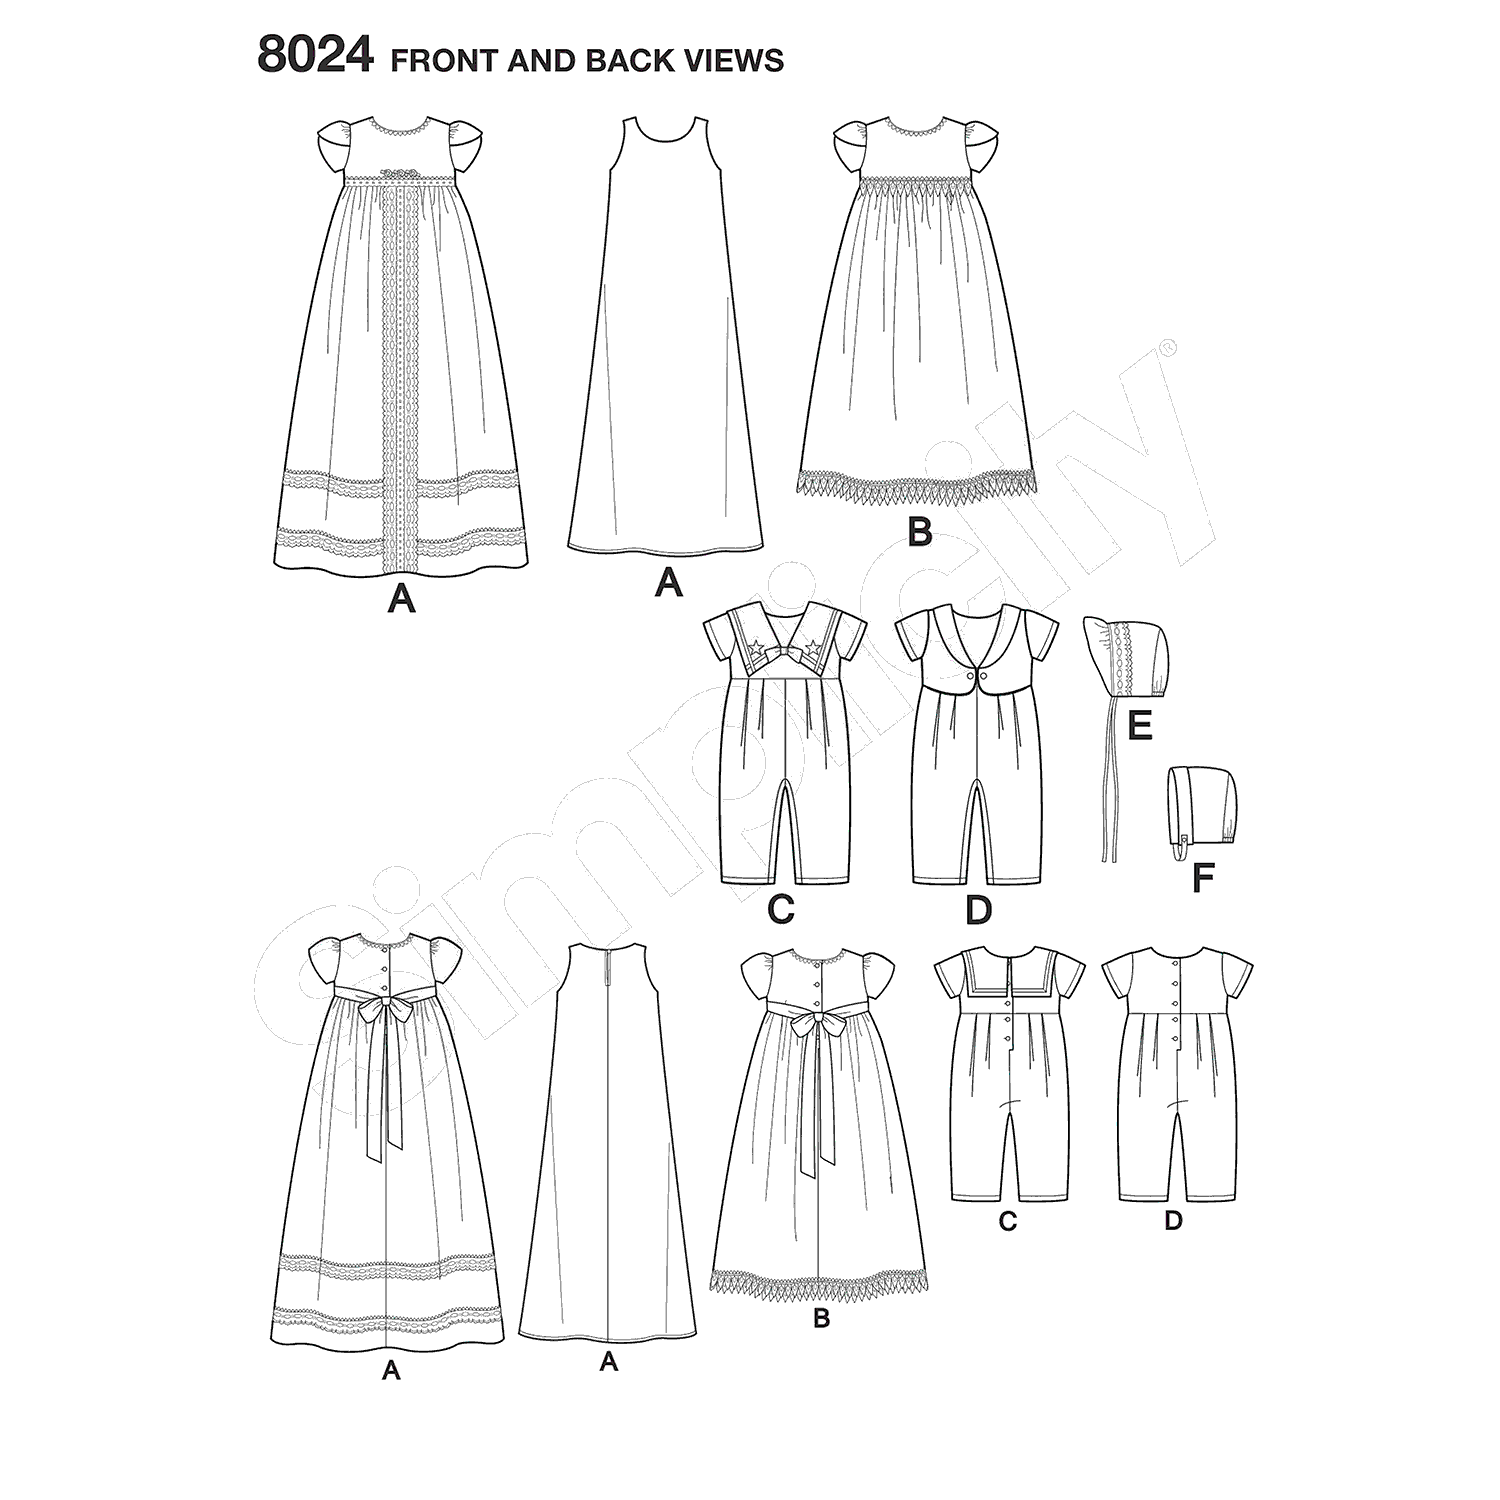 Dolls.Clothes, Horse, House Patterns: 5215 SIMPLICITY RETRO BABY DOLL SLIP,  DRESS, COAT, OVERALLS, GOWN PATTERN 12-22''